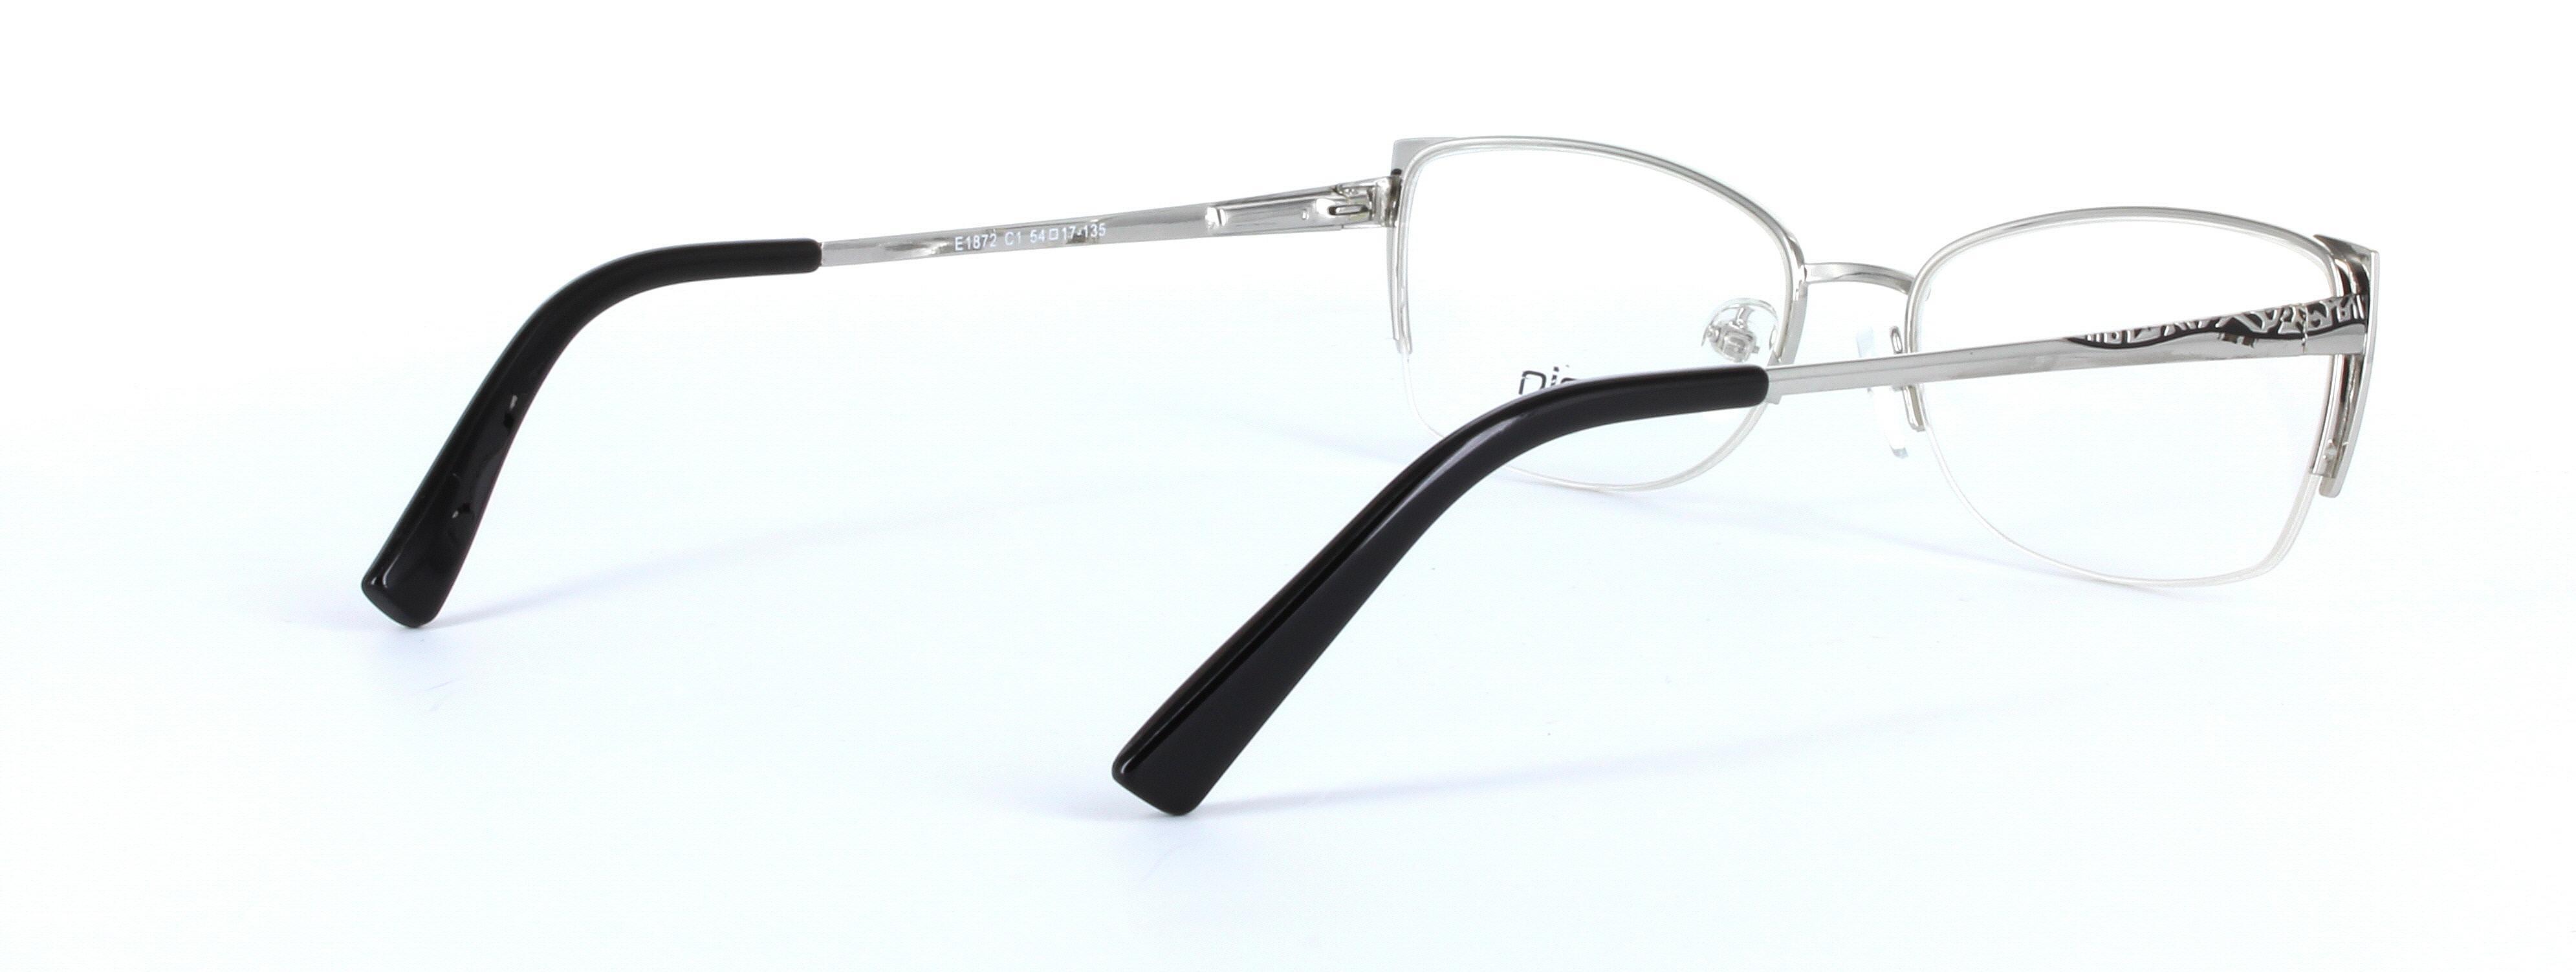 Donna Silver Semi Rimless Oval Rectangular Metal Glasses - Image View 4